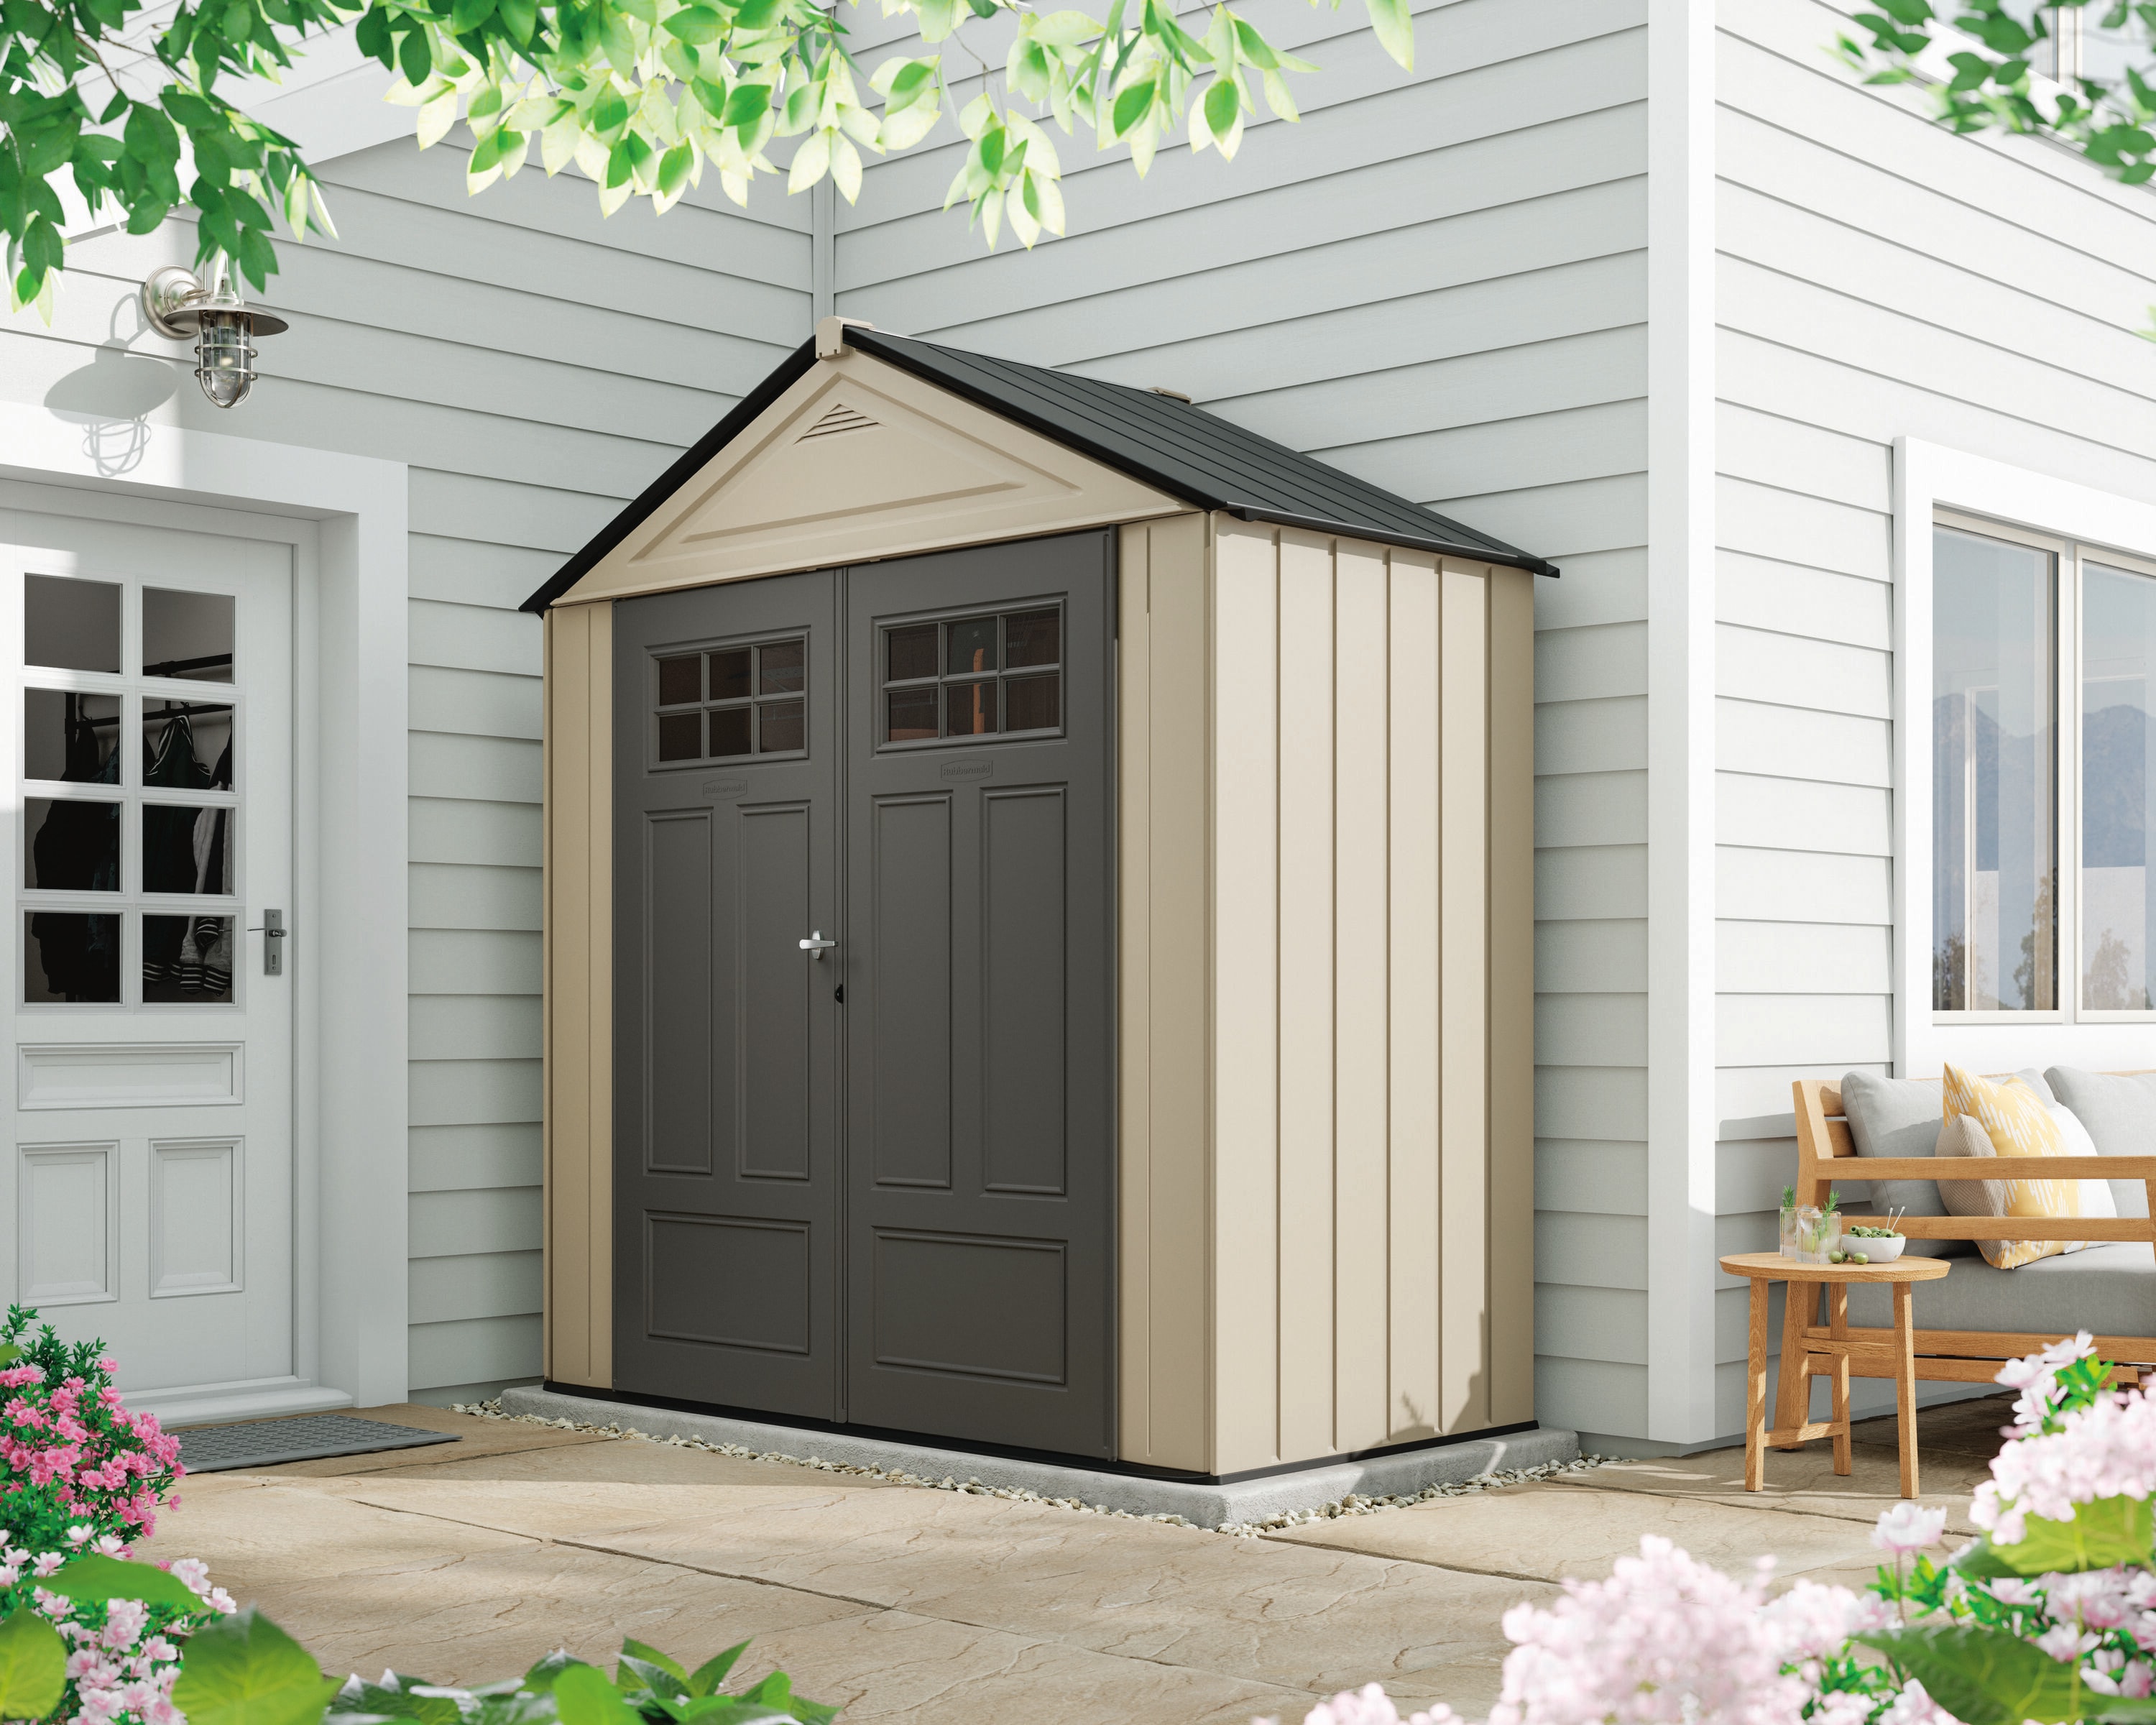 Rubbermaid 5-ft x 2-ft Roughneck Resin Storage Shed (Floor Included) at